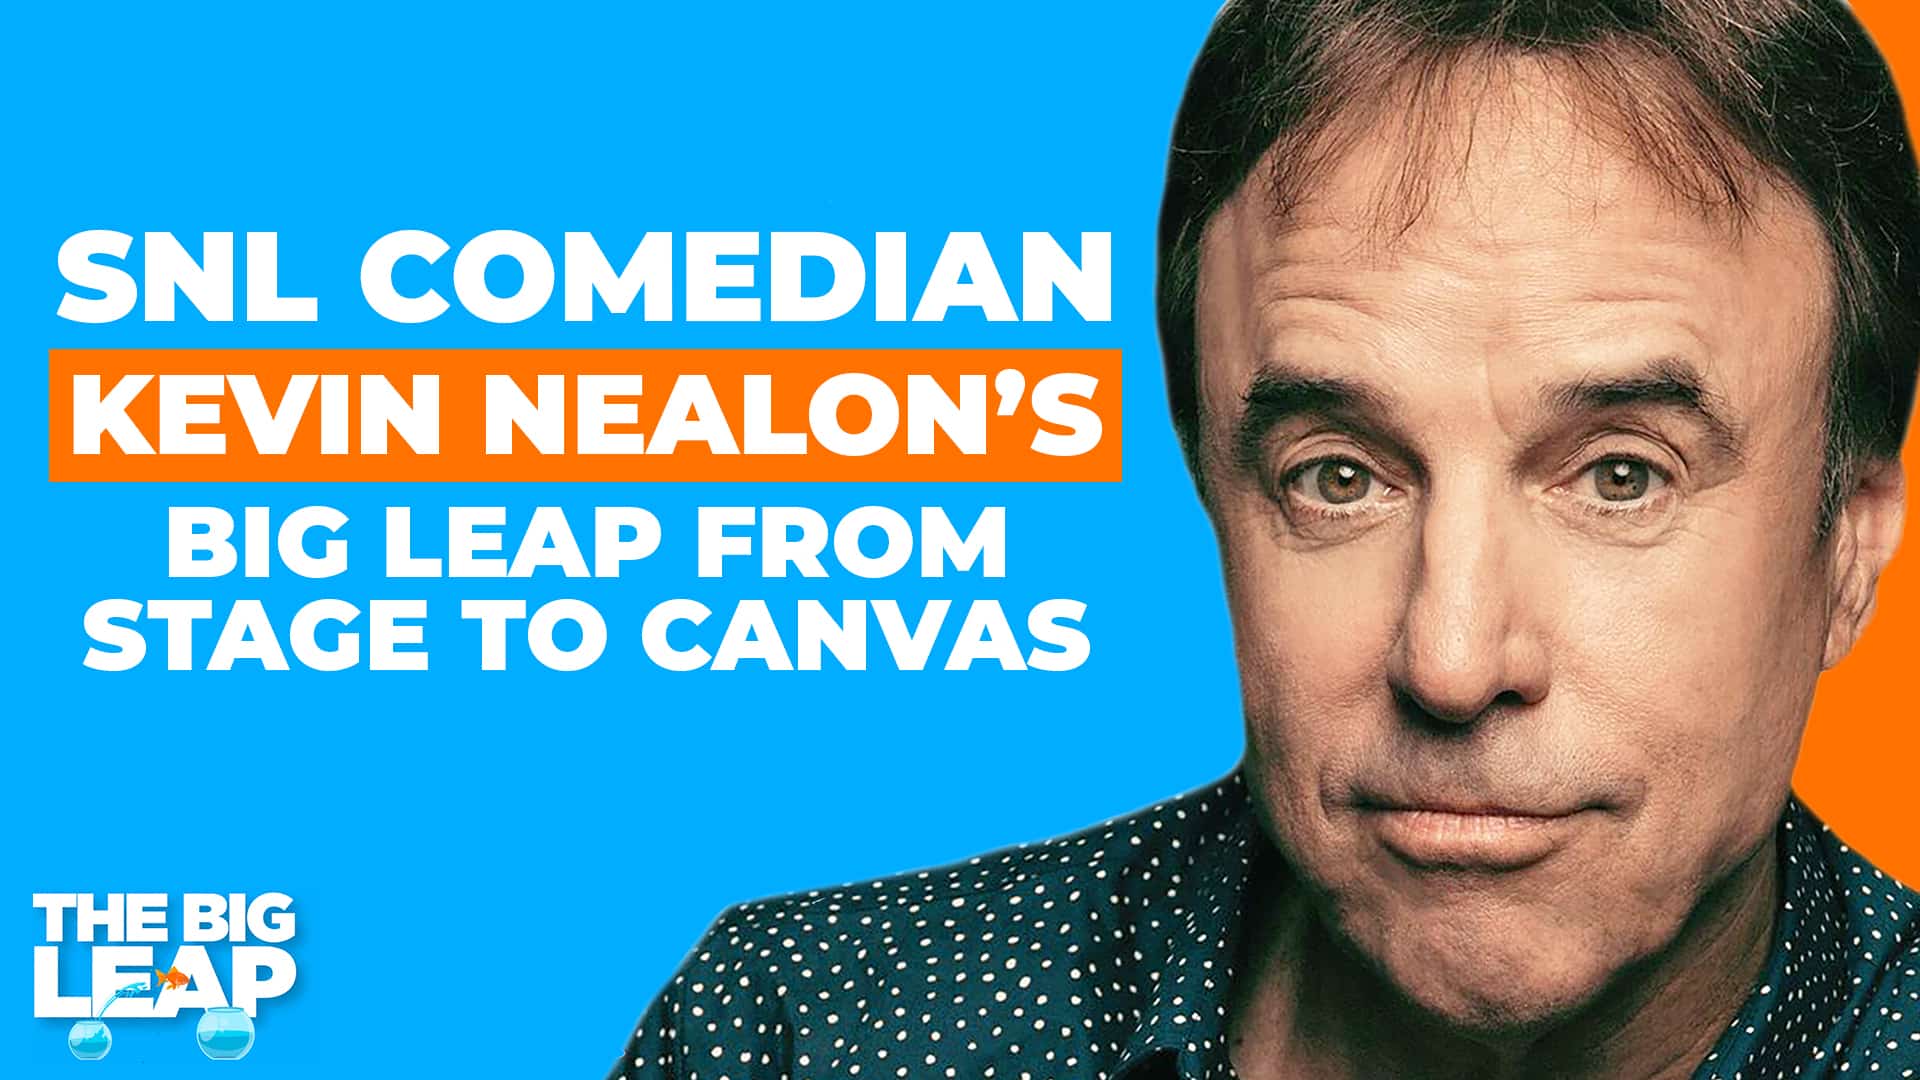 The Big Leap Episode 81 Cover Photo showing a photo of Kevin Nealon and the words "SNL Comedian Kevin Nealon's Big Leap from Stage to Canvas."